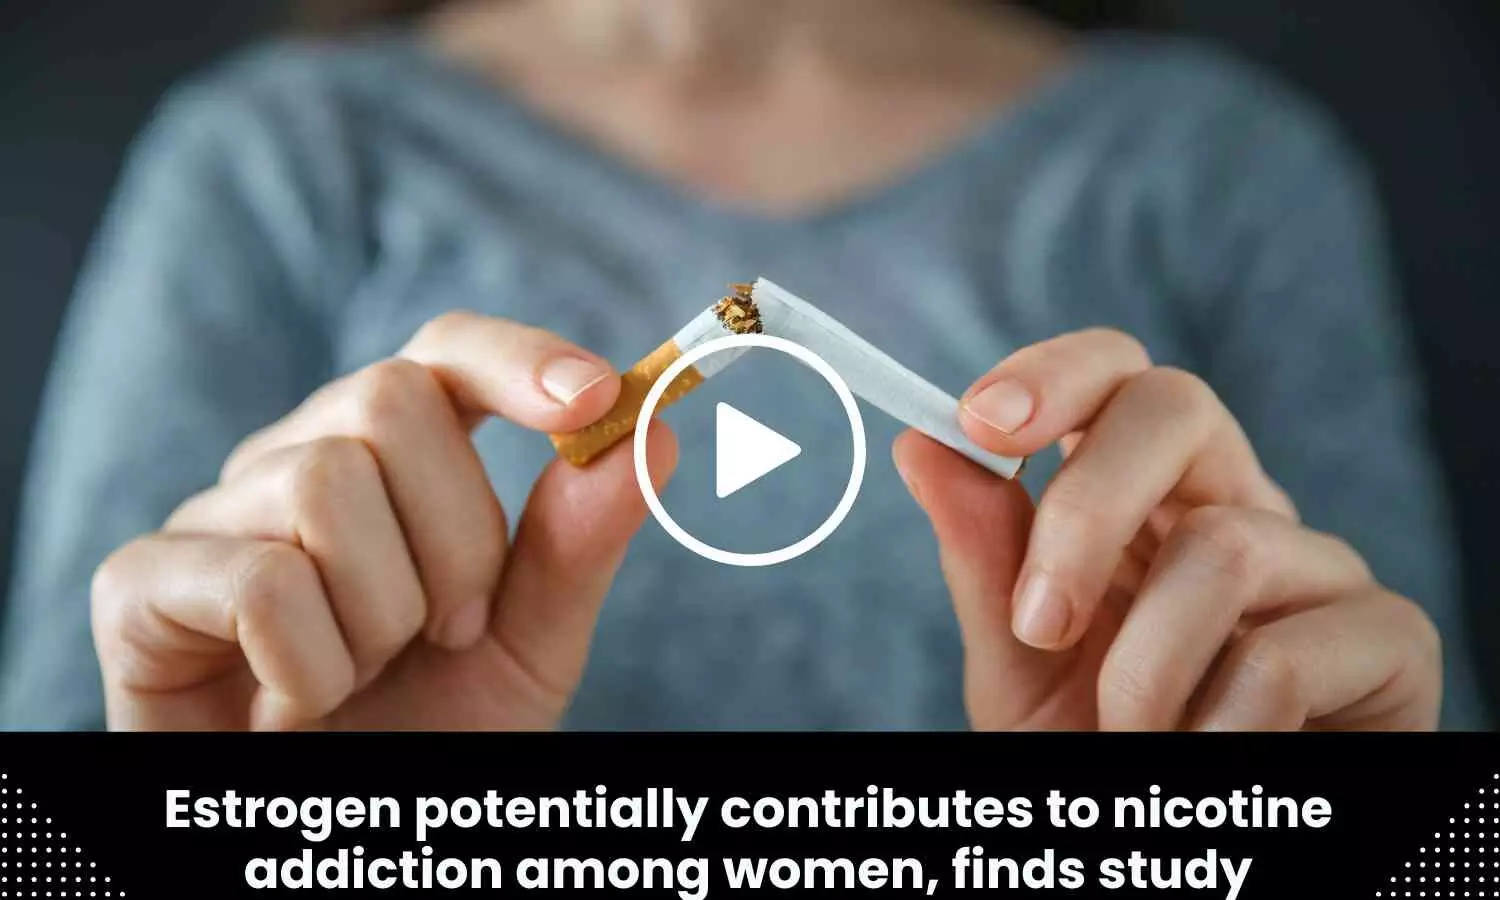 Estrogen potentially contributes to nicotine addiction among women, finds study